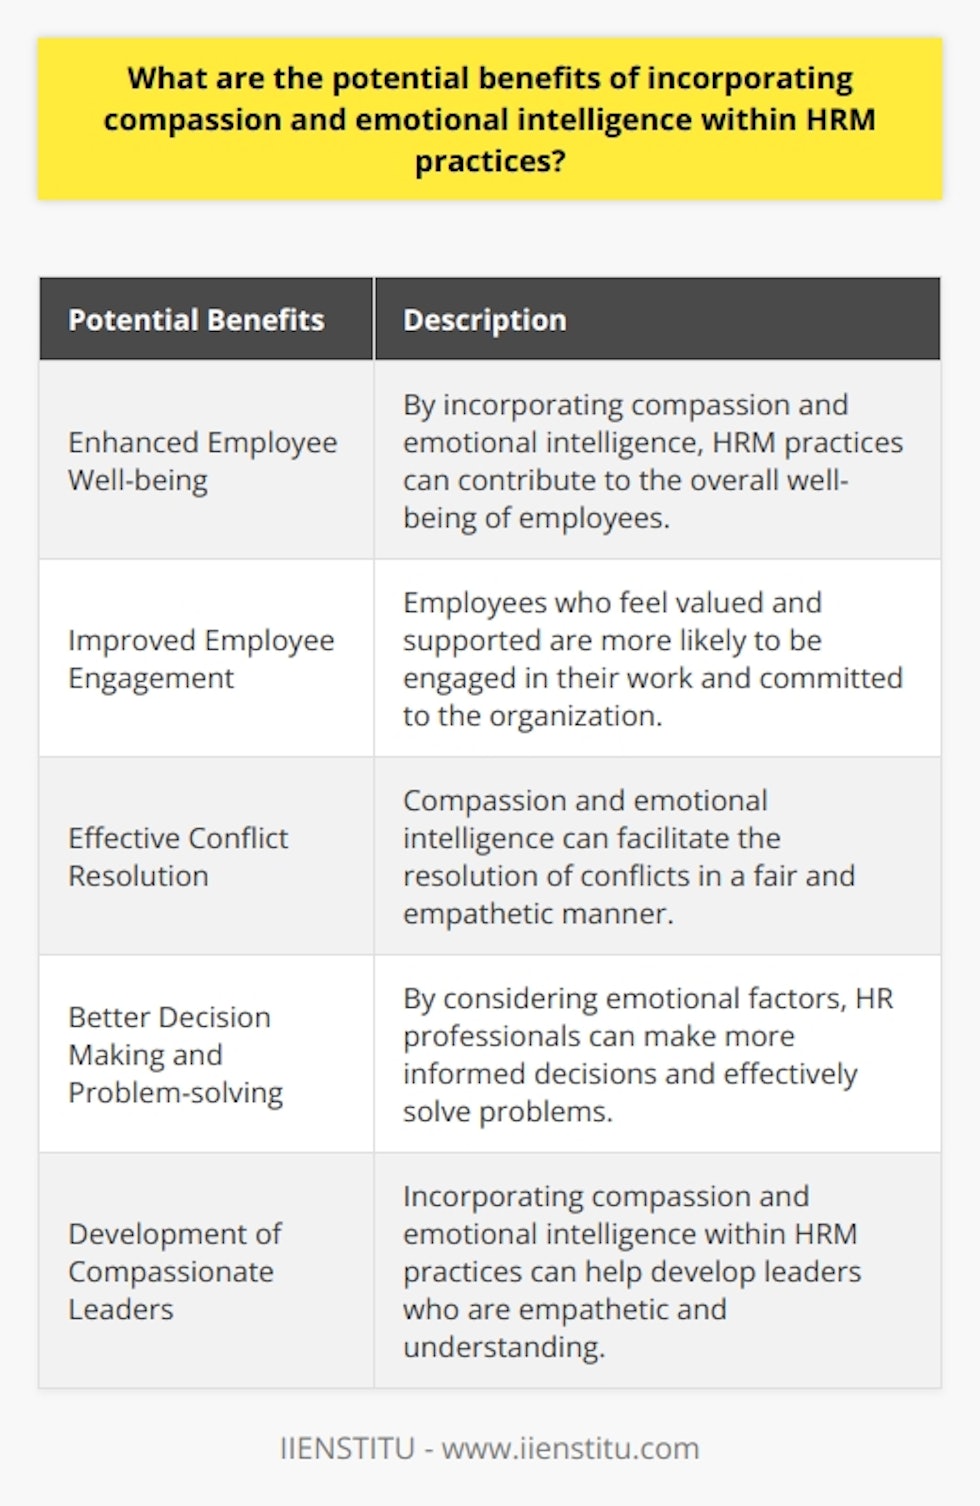 In conclusion, incorporating compassion and emotional intelligence within HRM practices can have numerous potential benefits for organizations. These include enhanced employee well-being, improved employee engagement, effective conflict resolution, better decision making and problem-solving, and the development of compassionate leaders. By prioritizing emotional needs and creating a supportive work environment, HR professionals can foster a positive and productive workplace. This ultimately leads to happier, more engaged employees and a more successful organization.